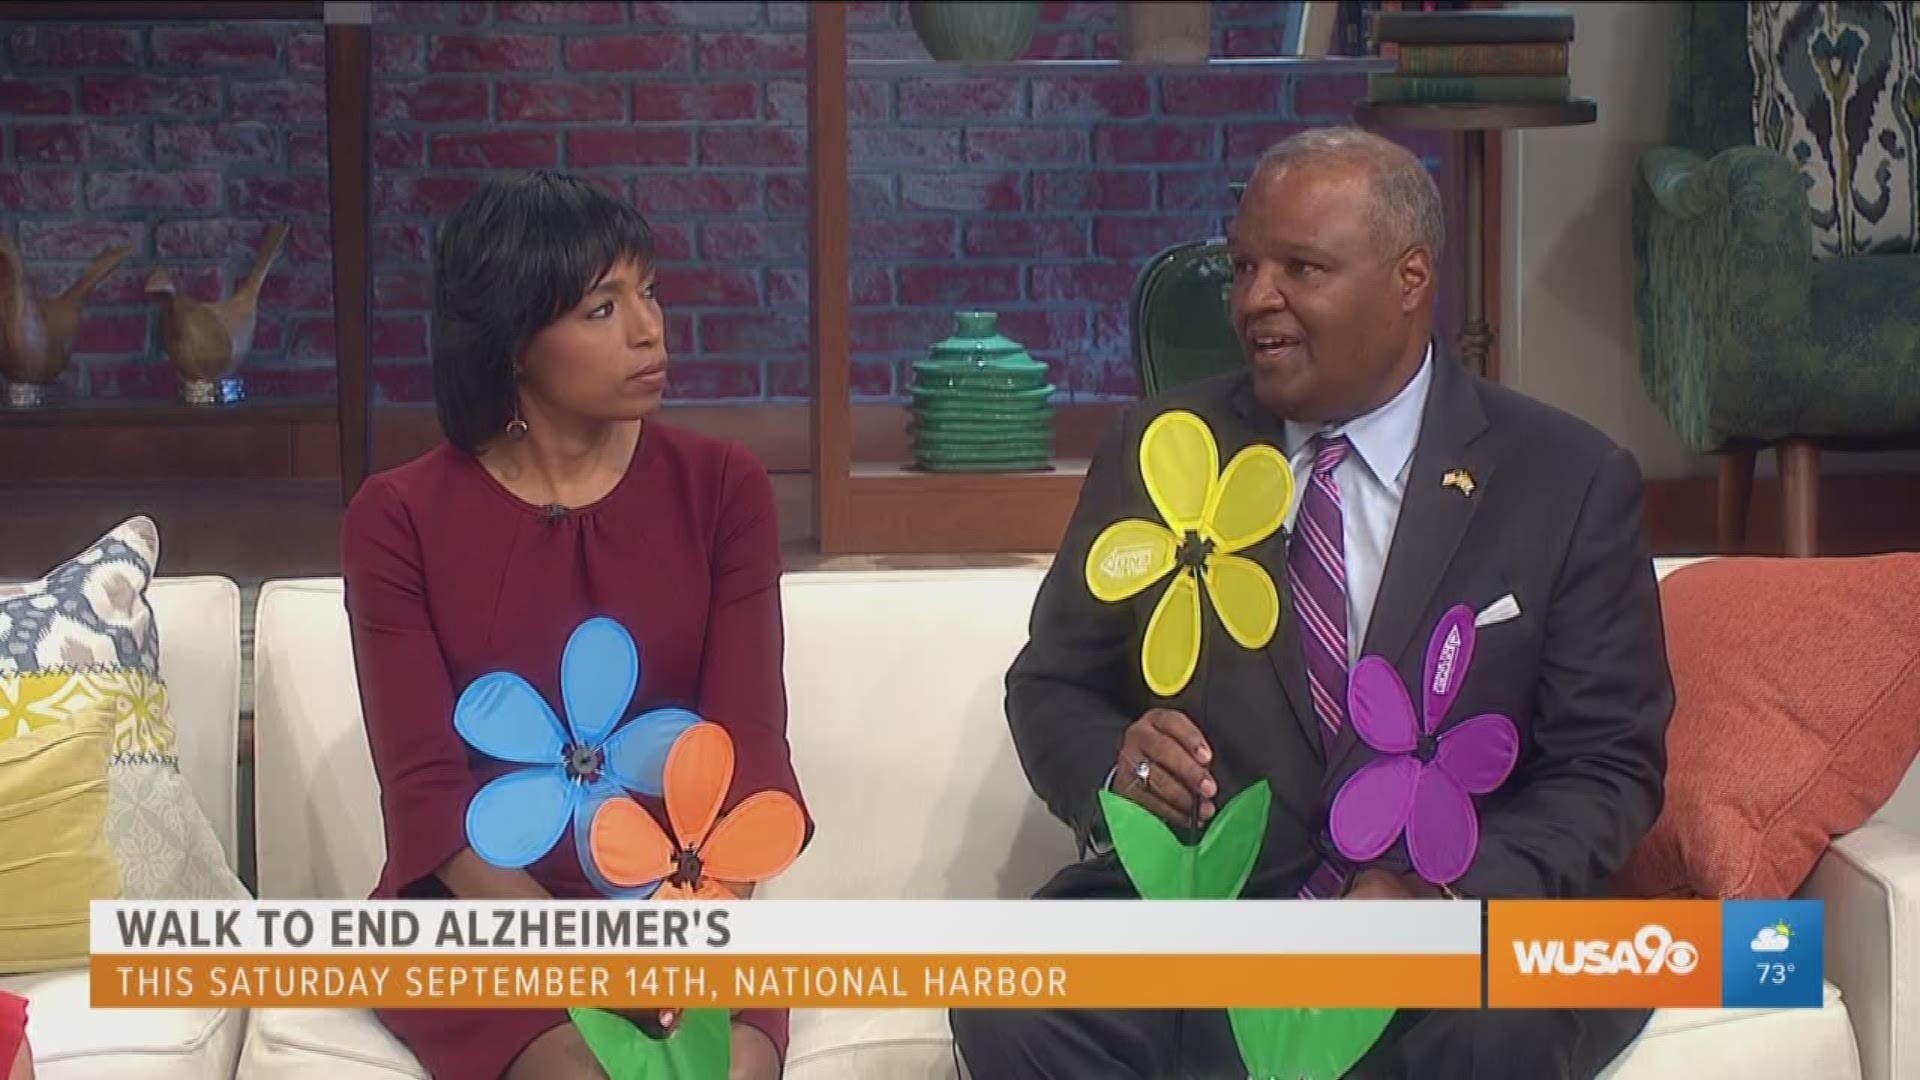 Prince George's County Executive Angela Alsobrooks and Former Prince George's County Executive Rushern Baker are working together to raise excitement for the Walk to End Alzheimer's at National Harbor on September 14th.  This is the first of 7 events in the DC metro to raise money for Alzheimer's research.  For more information visit alz.org/walk.